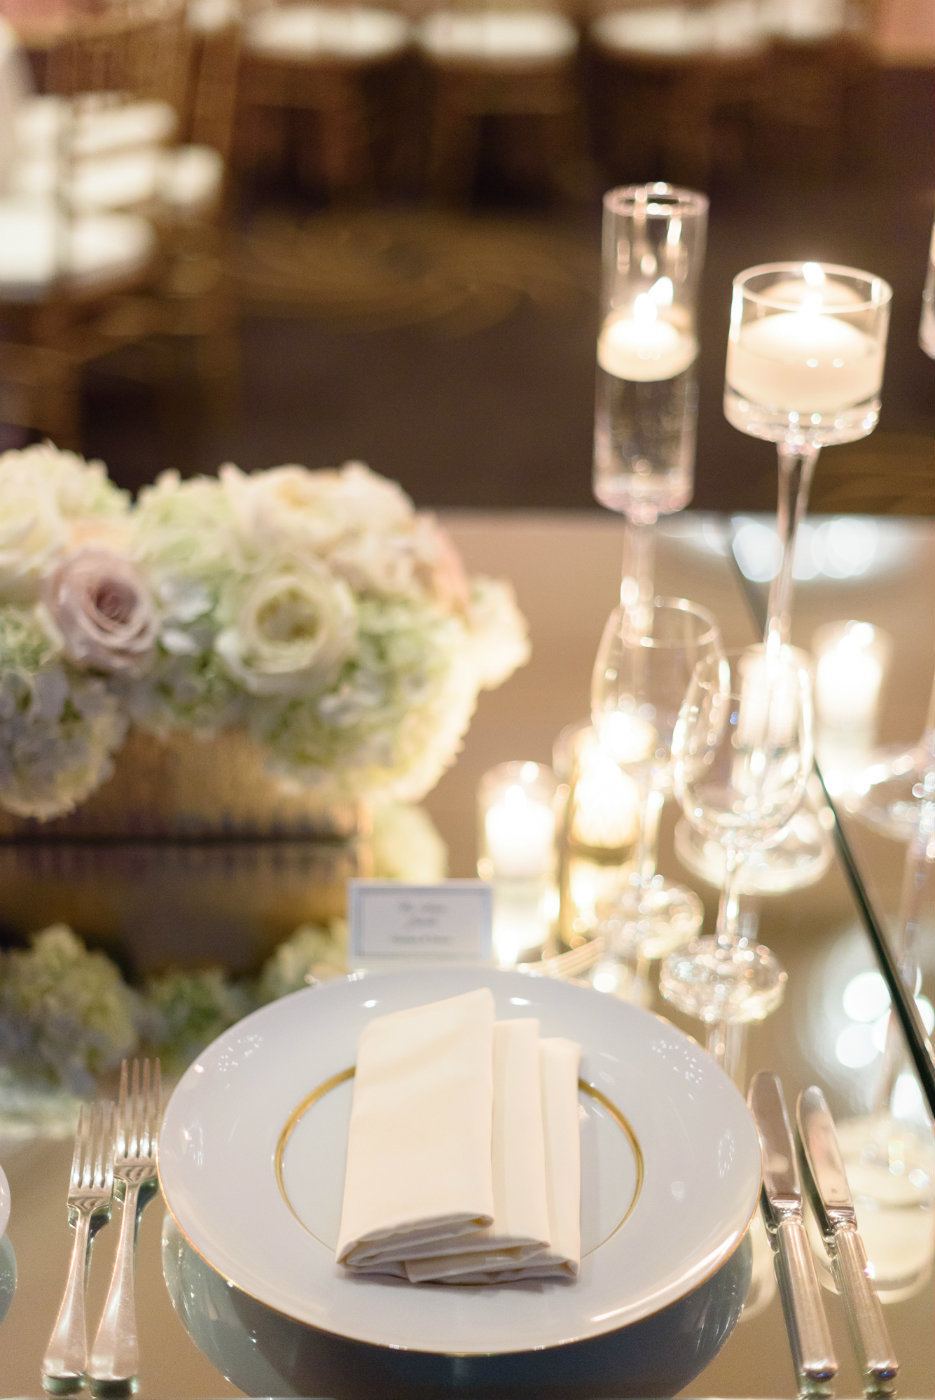 Simple and elegant place setting becomes striking on a mirrored table for this Seattle Four Seasons wedding.